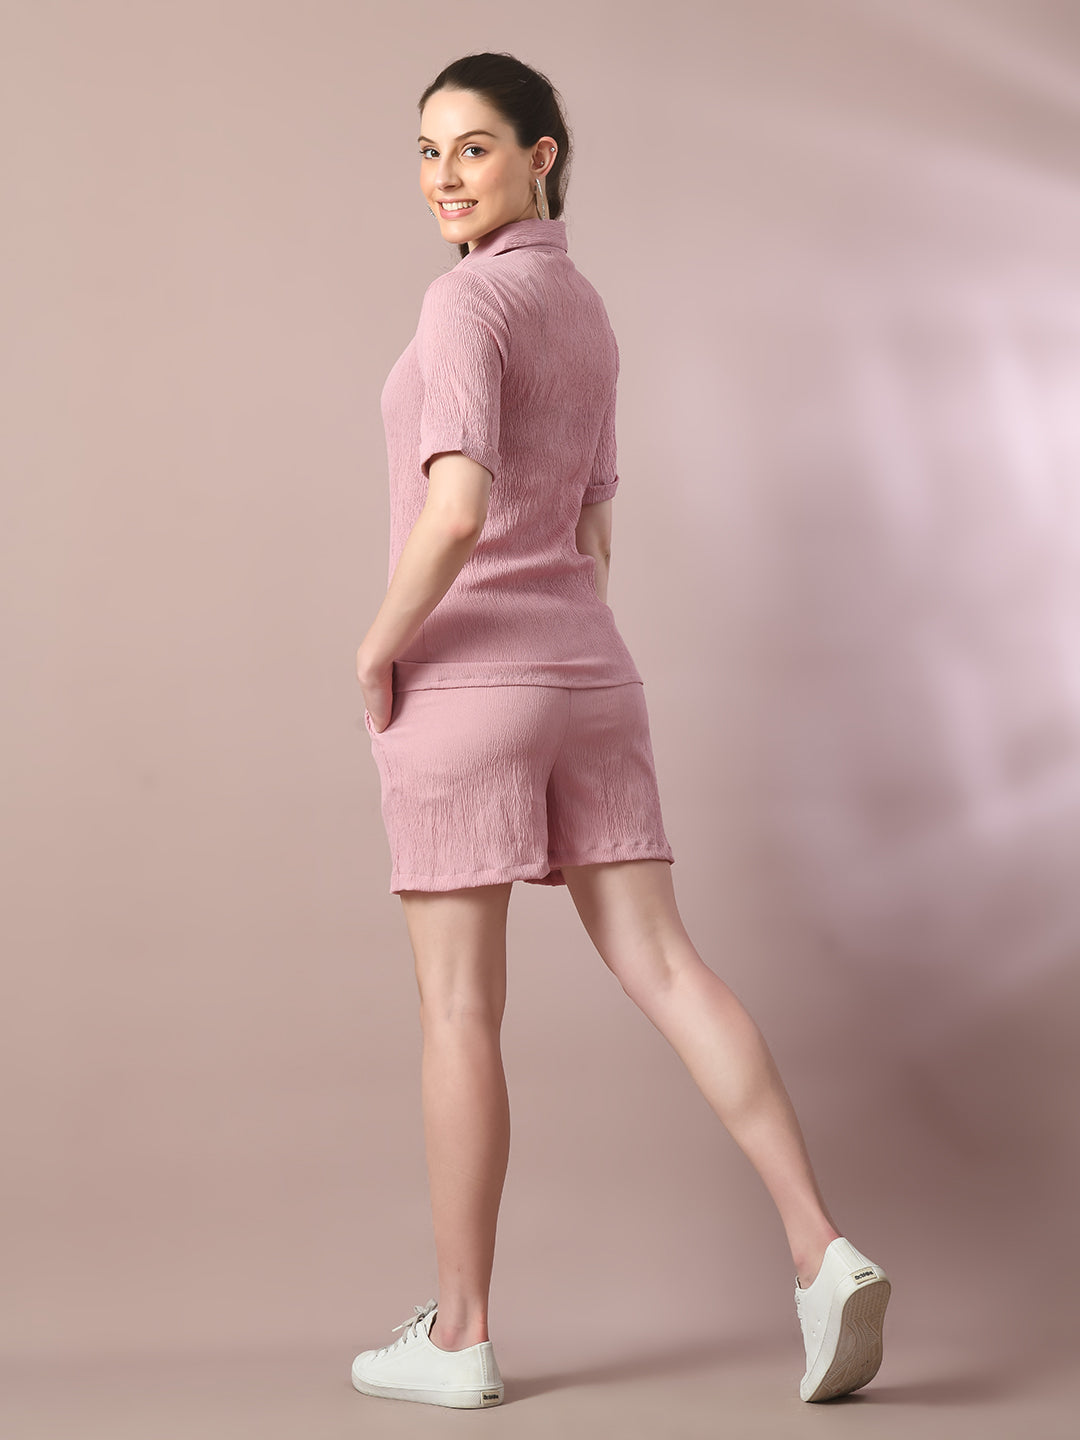 Women's  Pink Solid Shirt Collar Party Shirt With Shorts Co-Ord Set  - Myshka